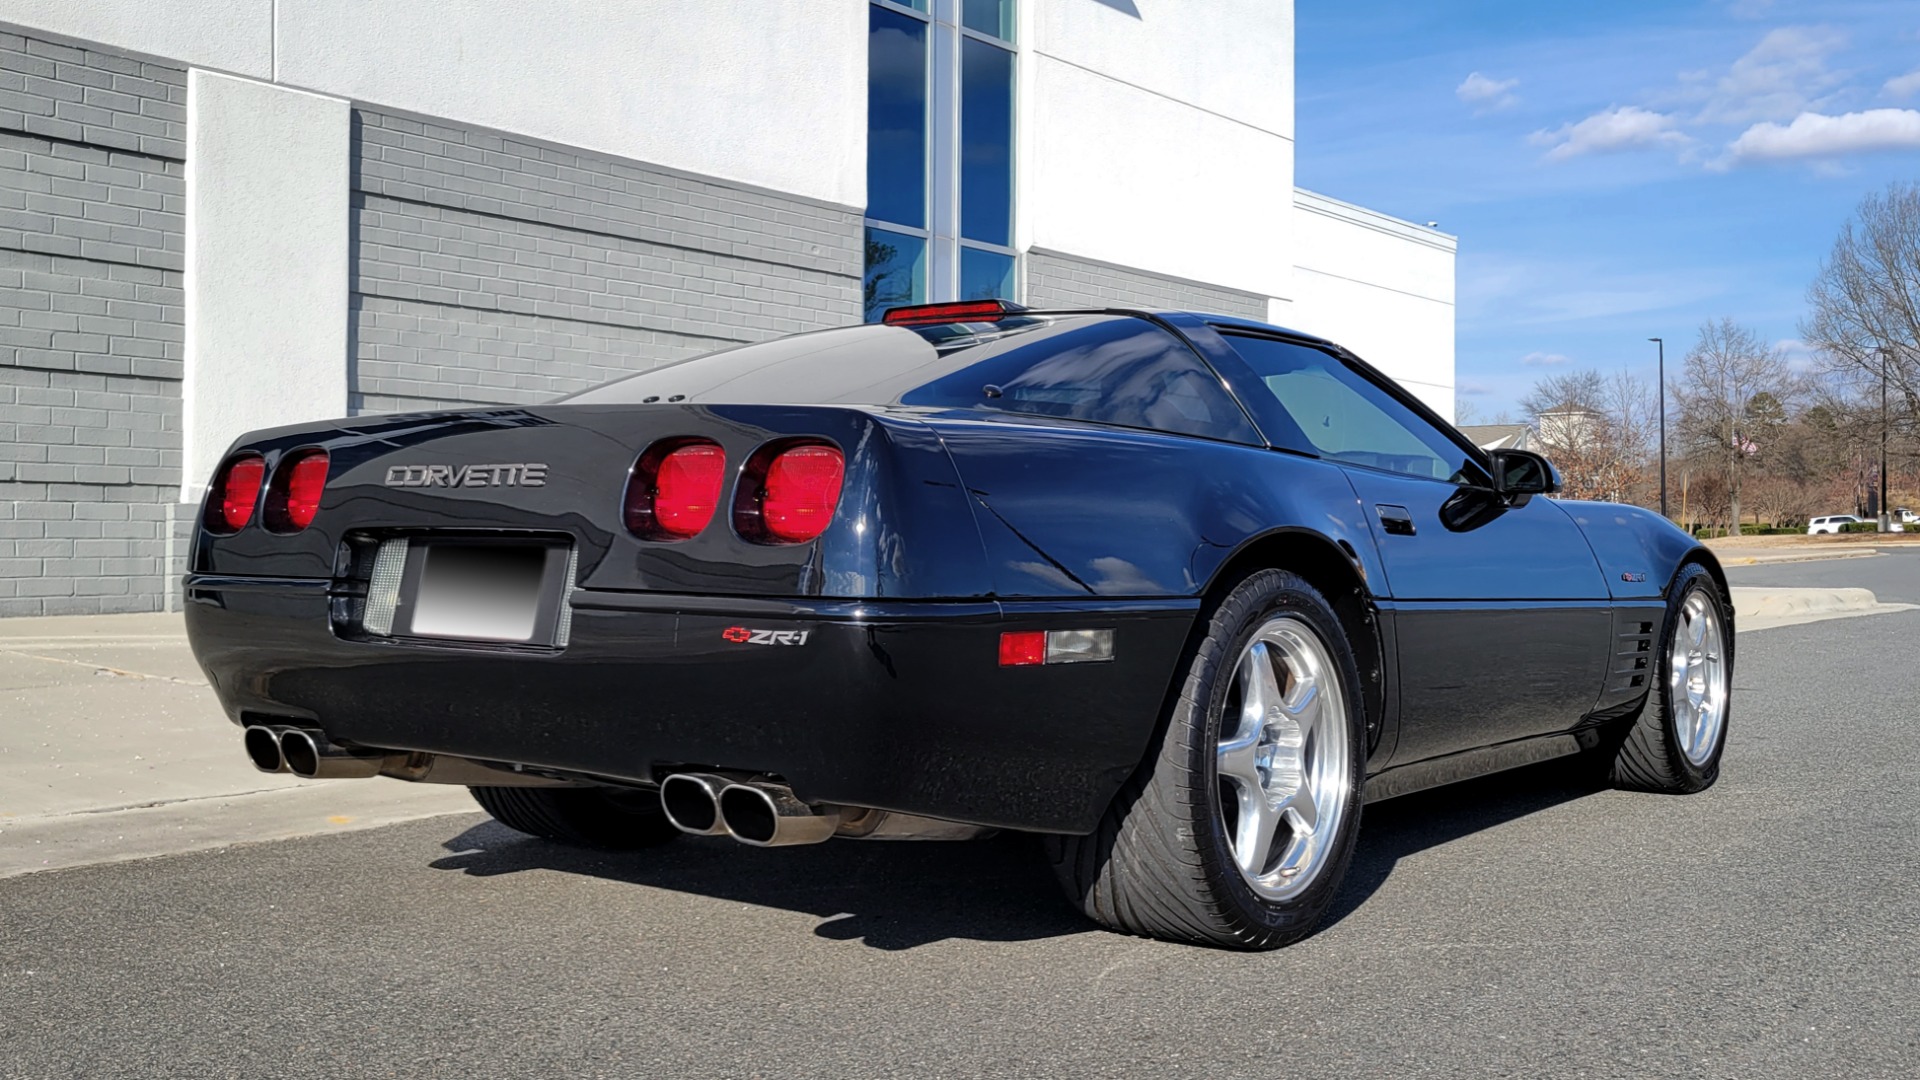 Used 1994 Chevrolet CORVETTE ZR1 COUPE (420HP) / 6-SPEED MANUAL / 2-TOPS / LOW MILES for sale Sold at Formula Imports in Charlotte NC 28227 8